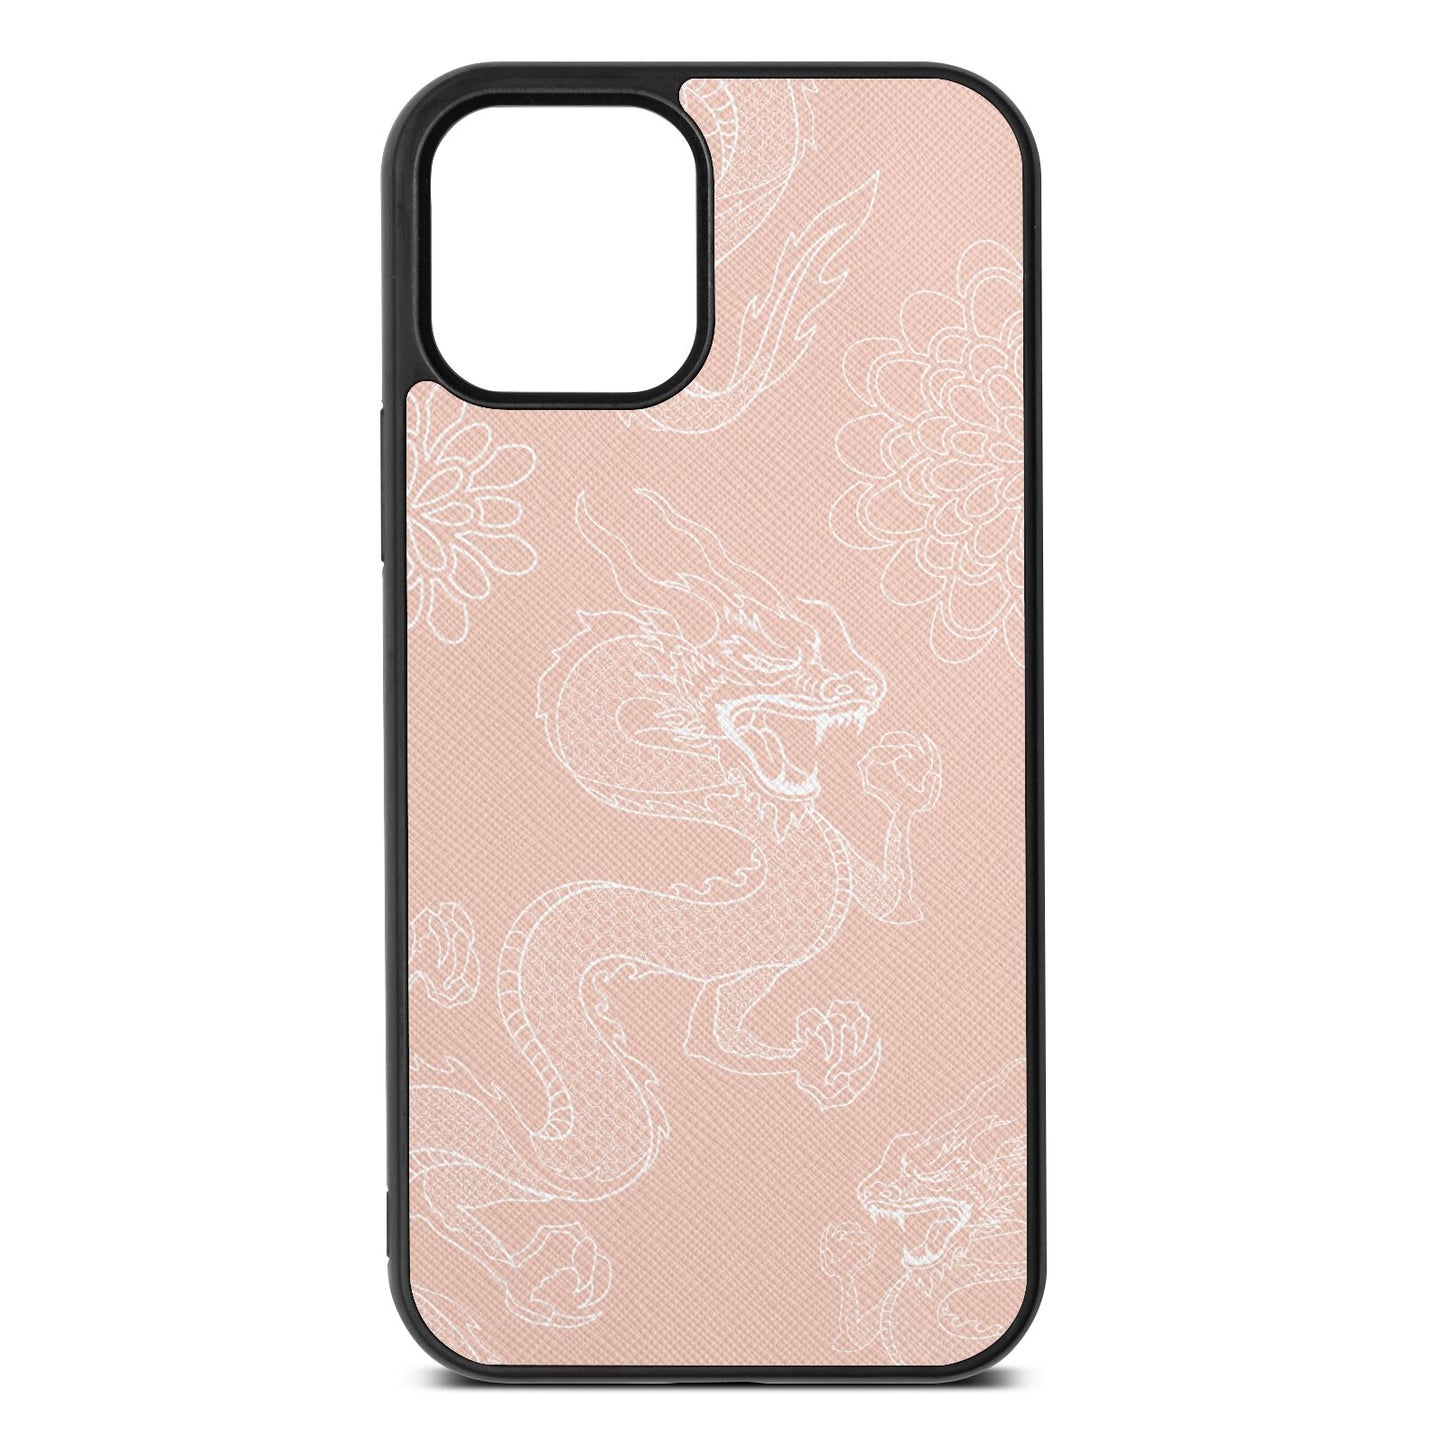 Dragons Nude Saffiano Leather iPhone 12 Case